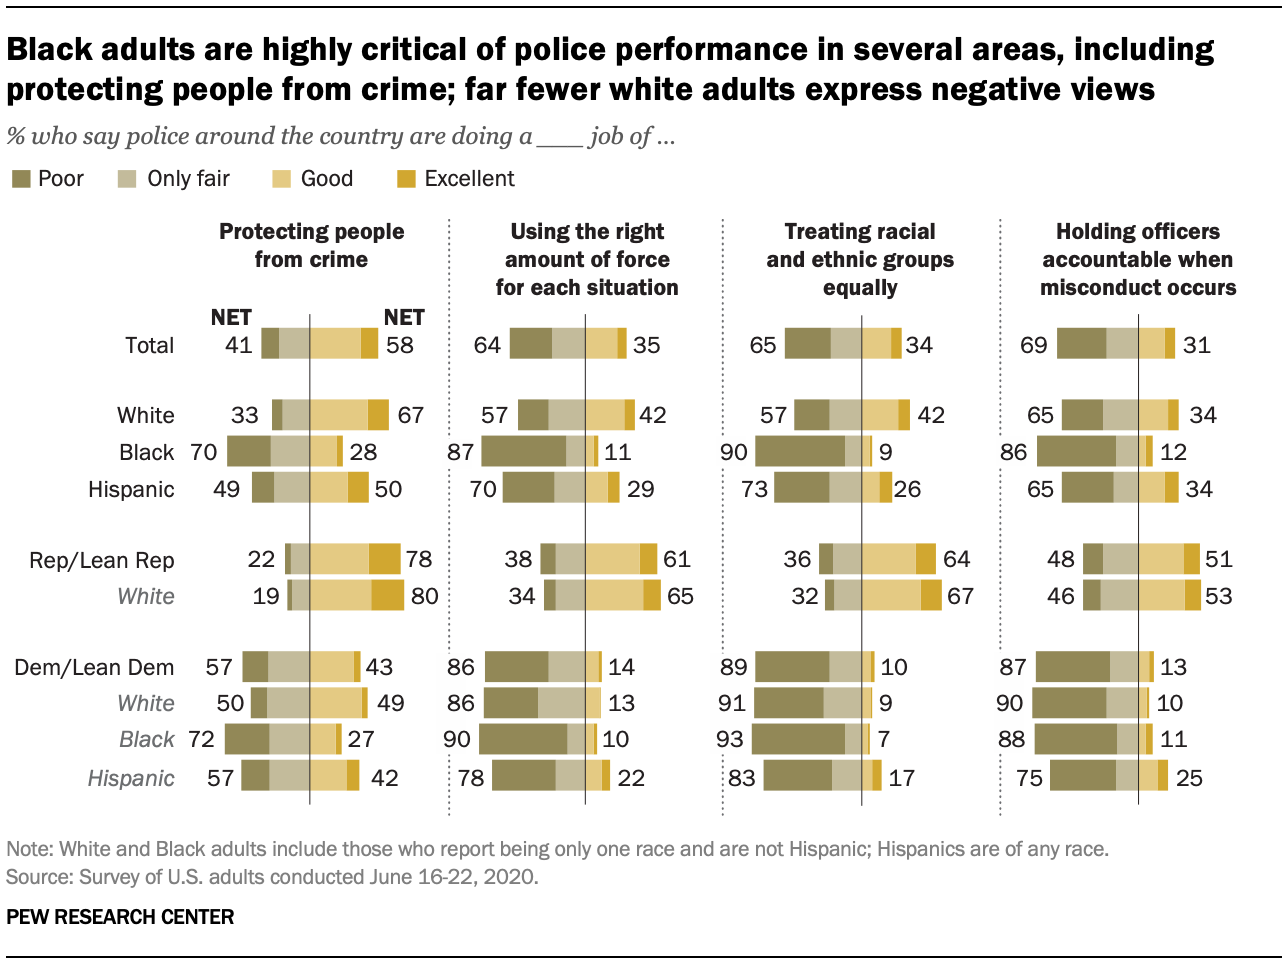 Black adults are highly critical of police performance in several areas, including protecting people from crime; far fewer white adults express negative views